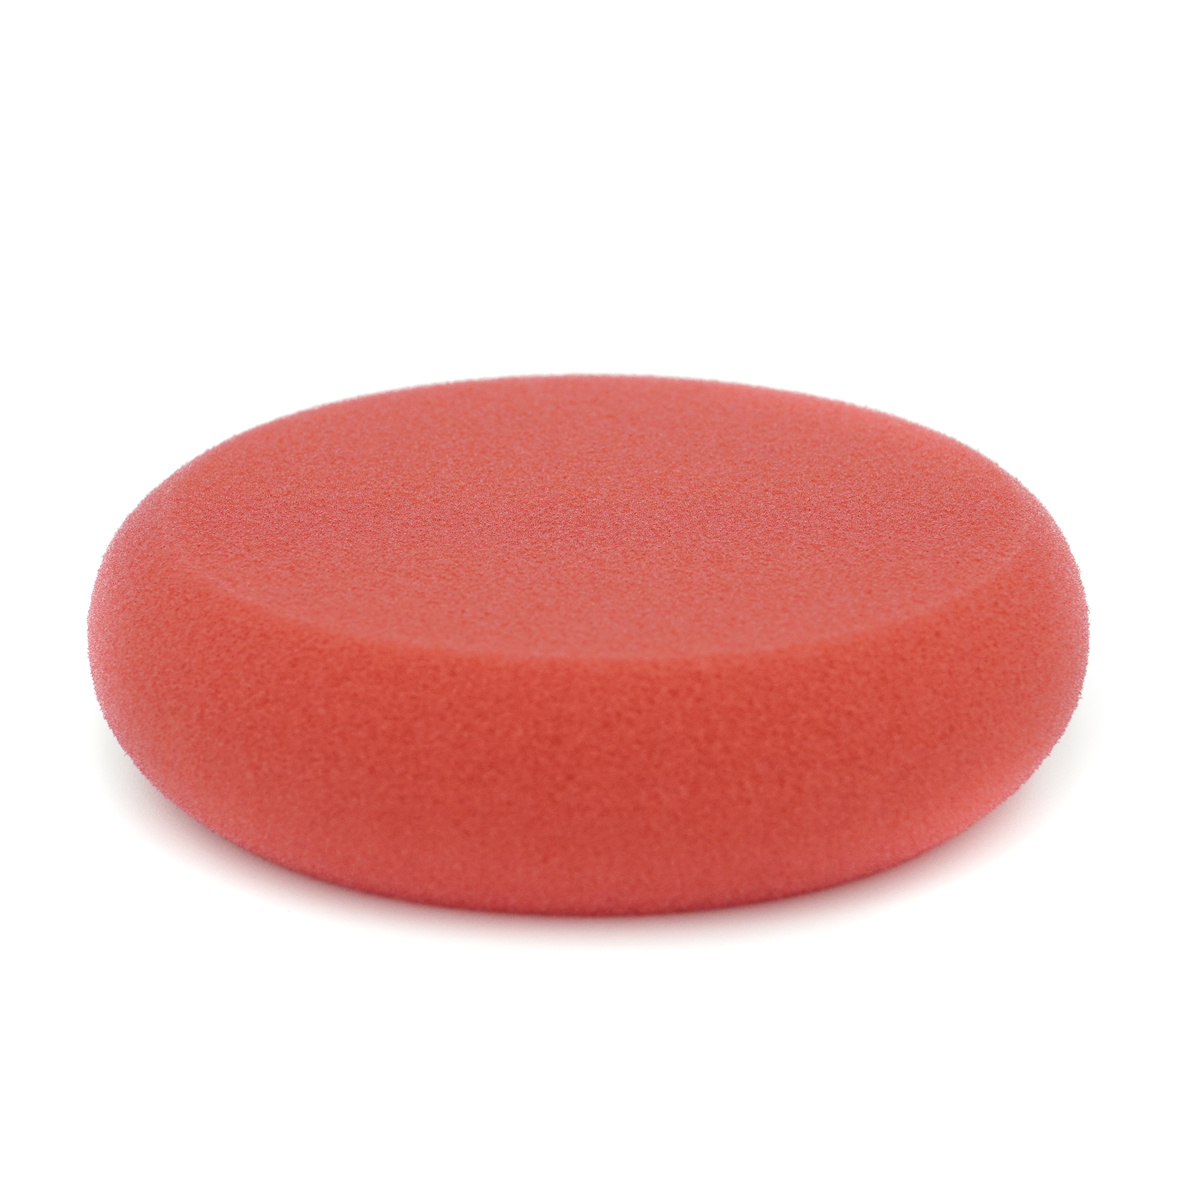 Red 4” Foam Wax Applicator Pads ， Car Detailing Buffing Pads for Waxing Polishing Paint Ceramic Featured Image